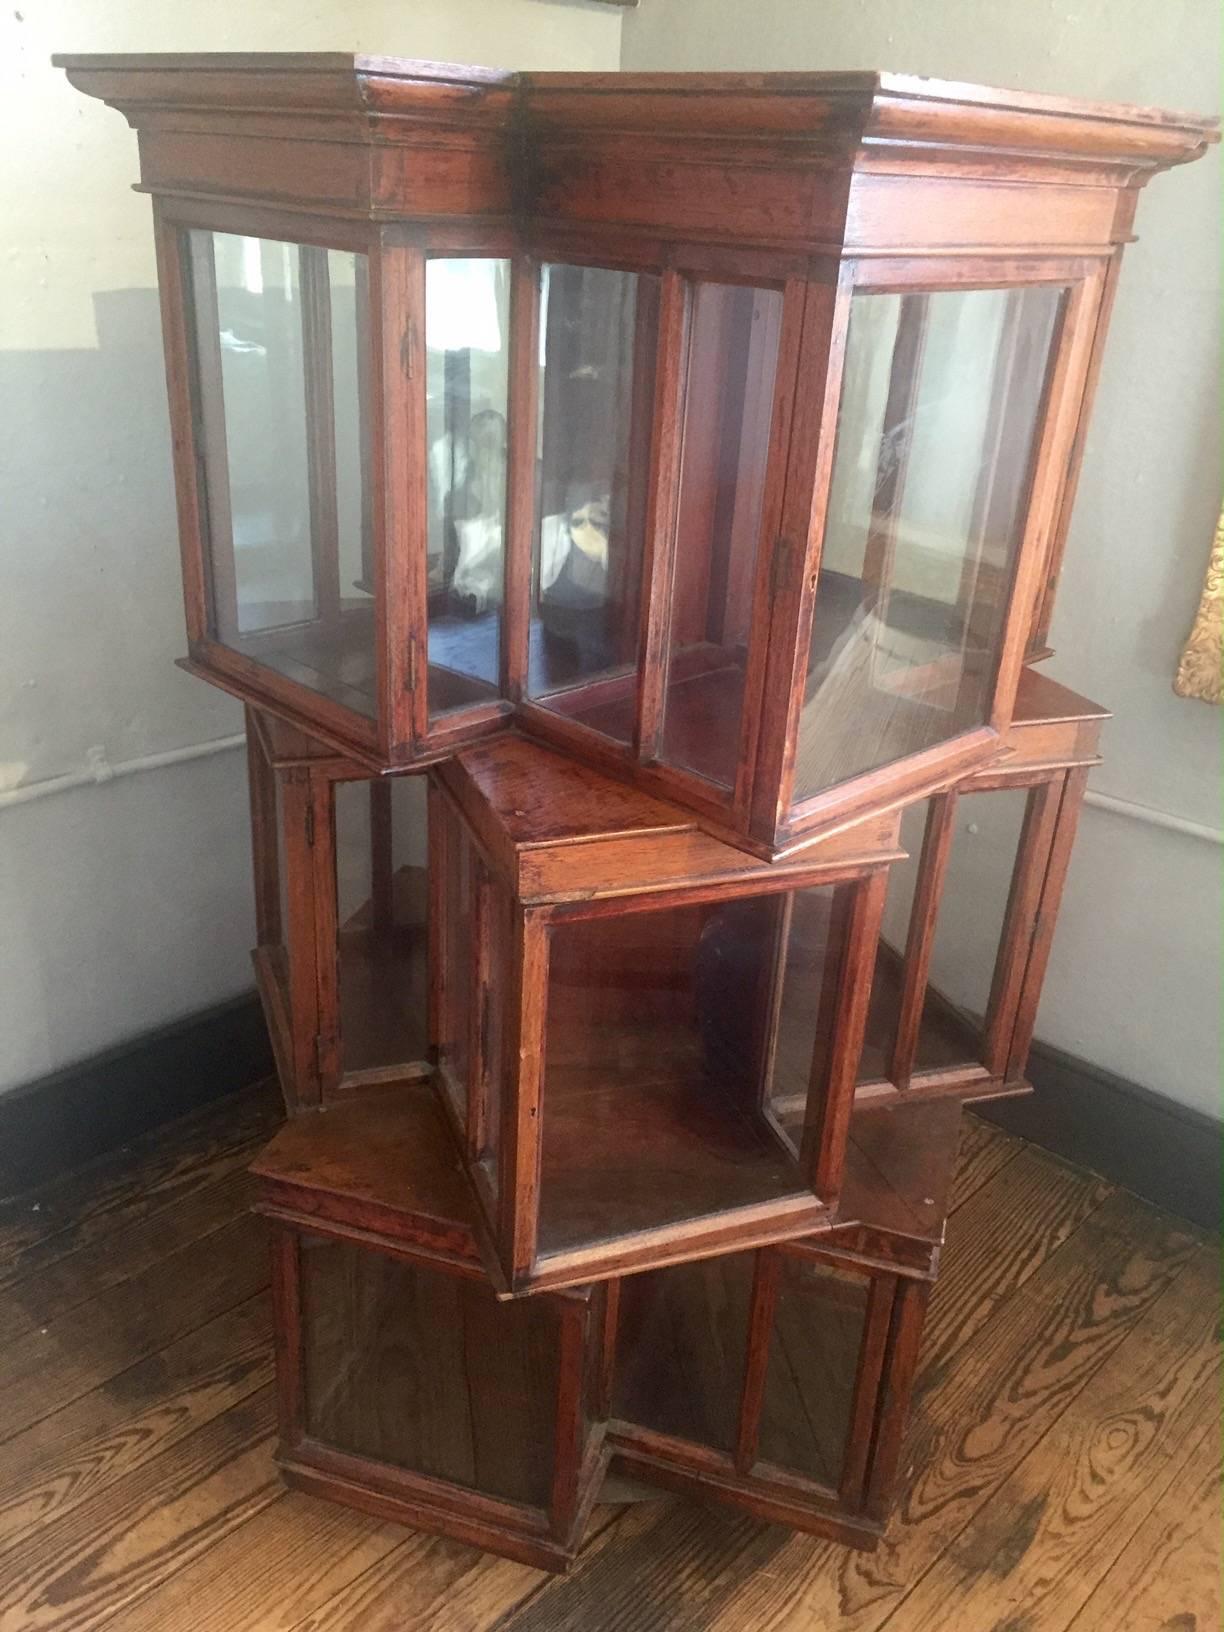 Fabulous mahogany and glass antique curio cabinet, angular and round, that can be turned 360 degrees to show books and objet d'art inside it's numerous cubicles.